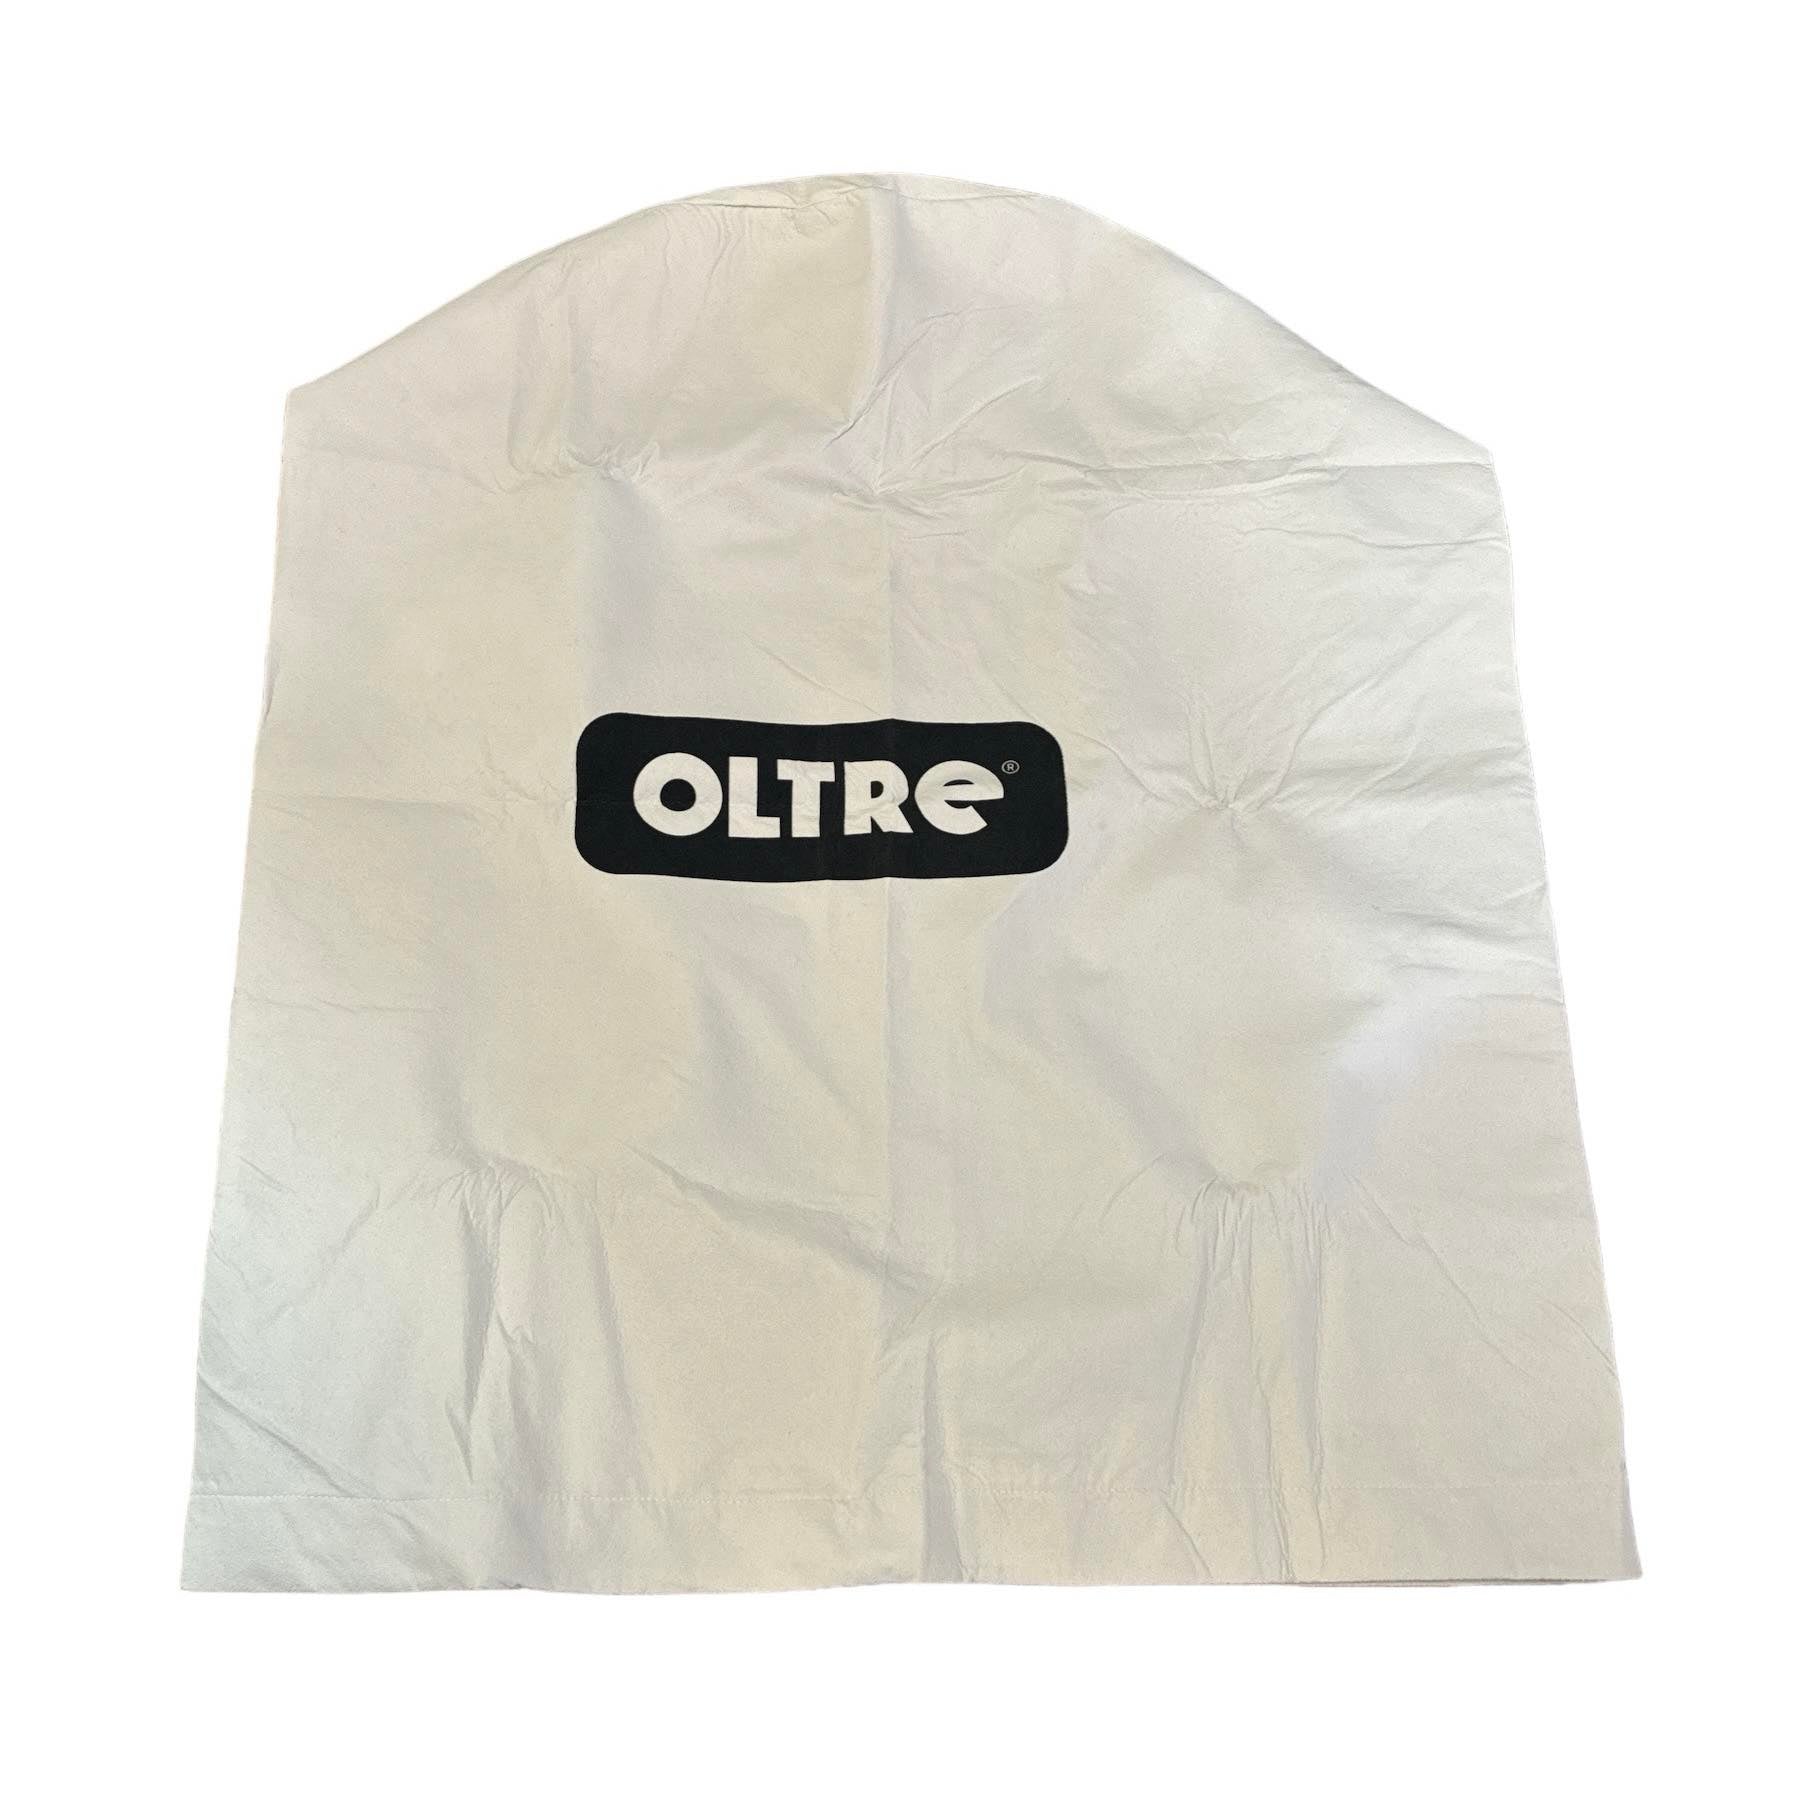 Dust Collector Filter Bag 500mm OT-DC-FB-500 by Oltre